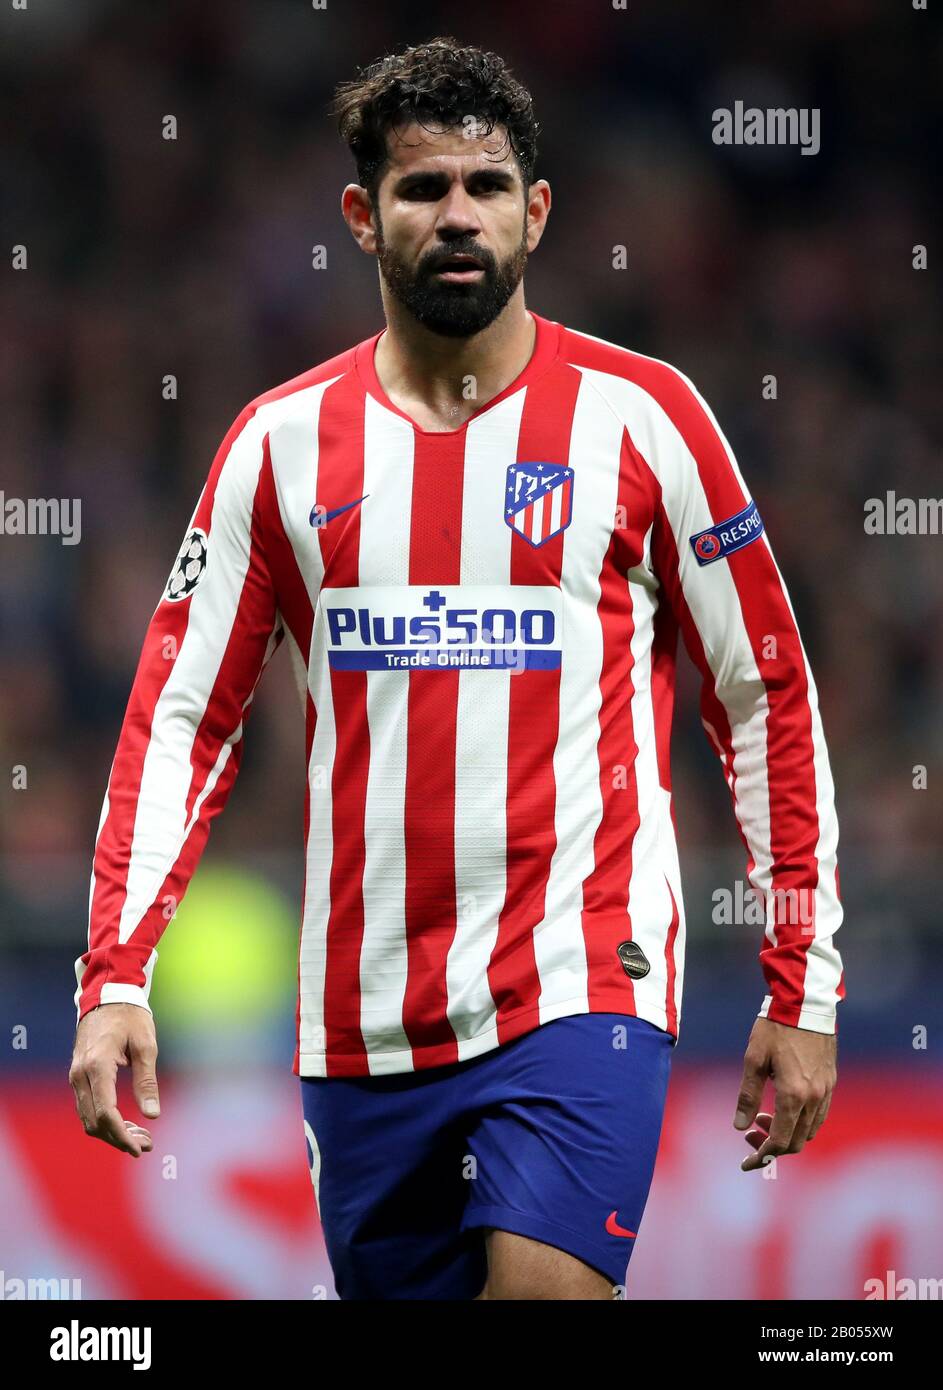 Atletico Madrid's Diego Costa during the UEFA Champions League round of 16 first leg match at Wanda Metropolitano, Madrid. Stock Photo